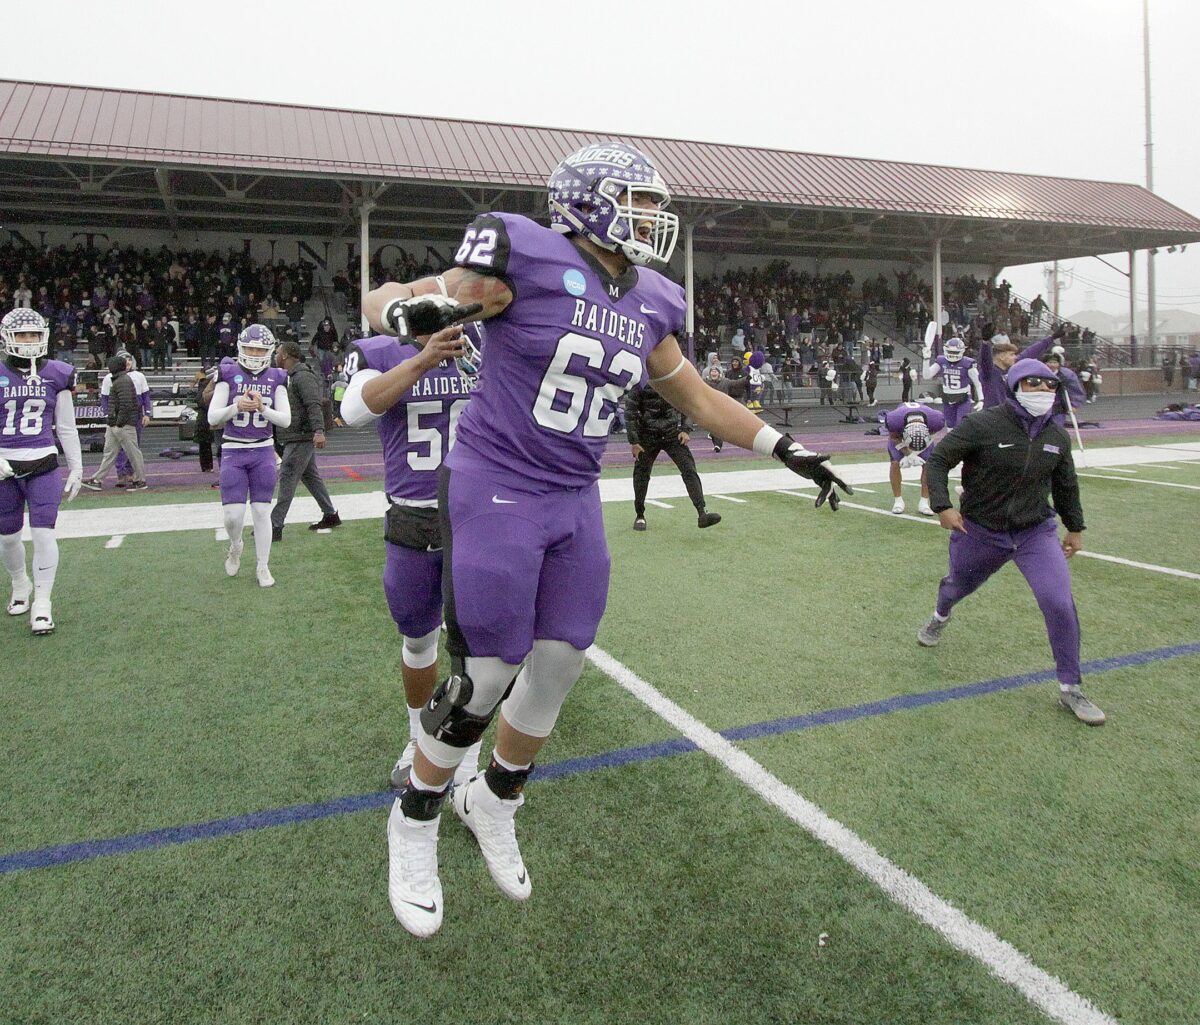 Division III Championship: Mount Union vs. North Central, live stream, preview, TV channel, time, how to watch